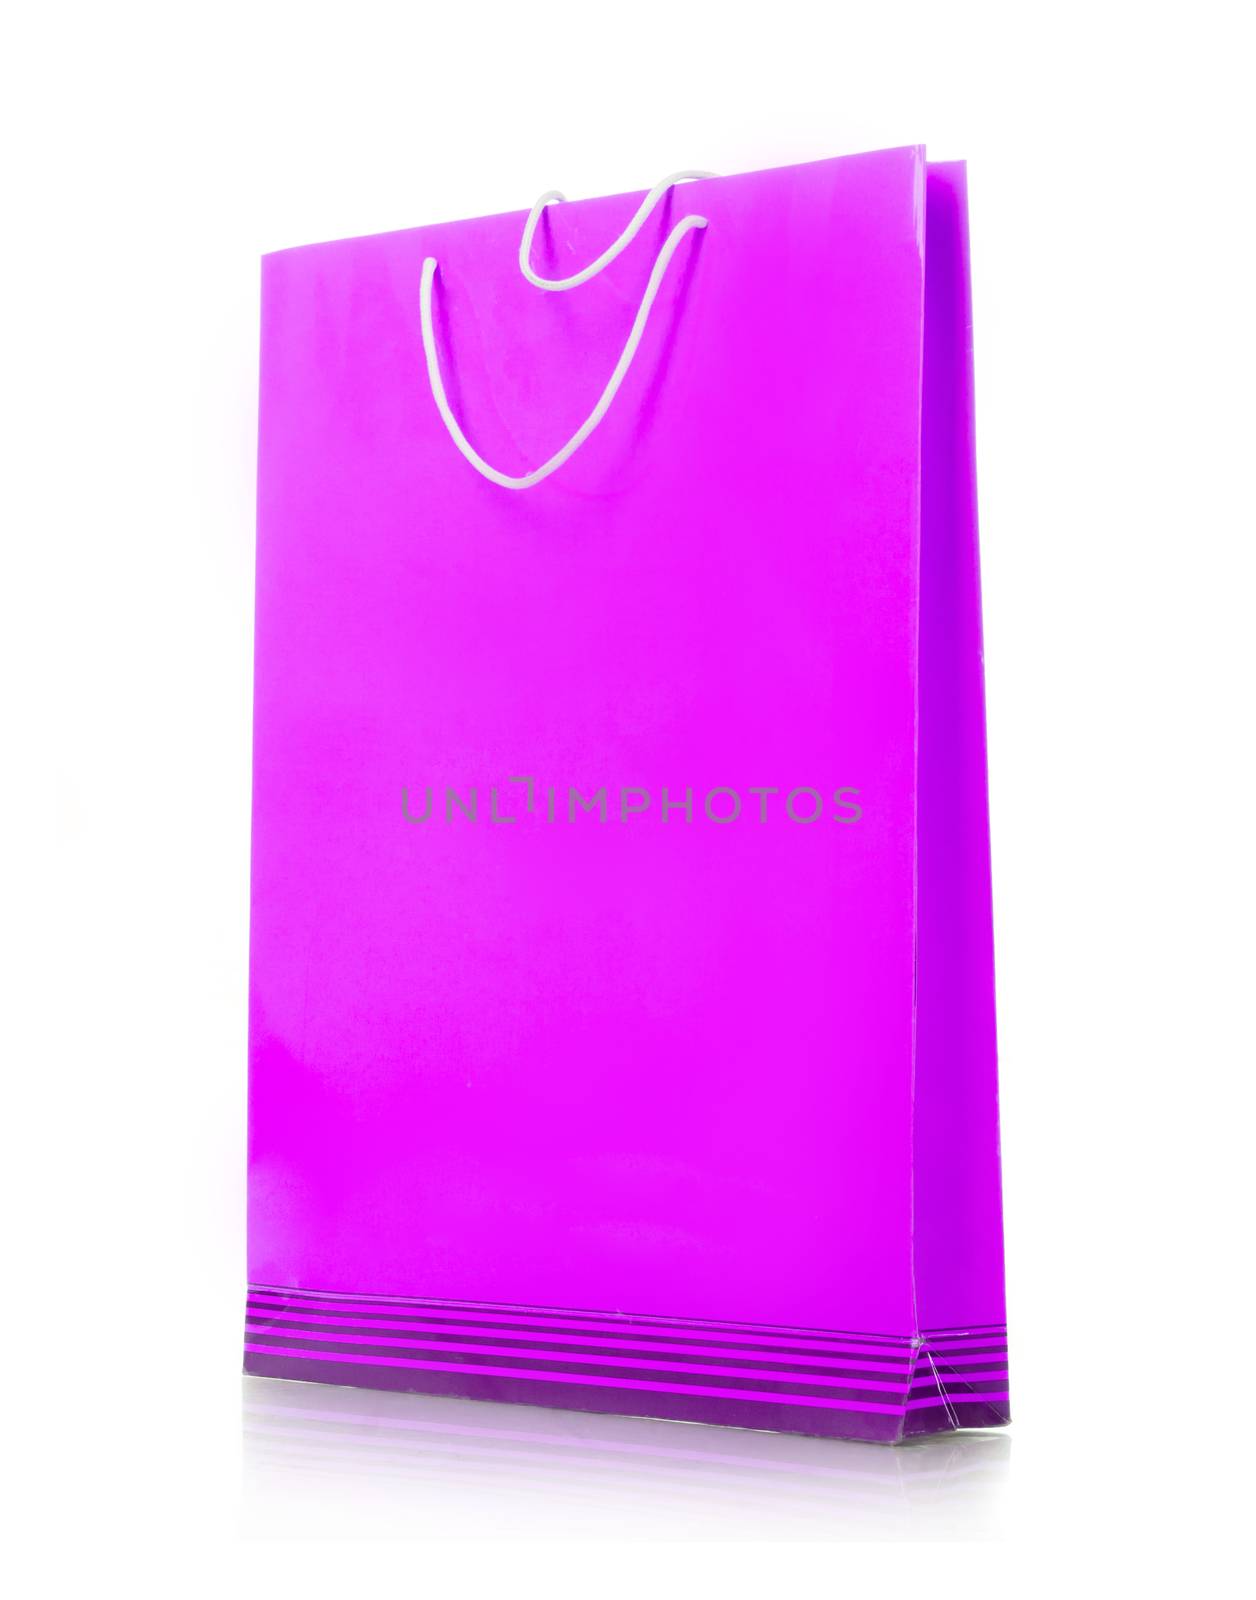 Shopping bag isolated on a white background